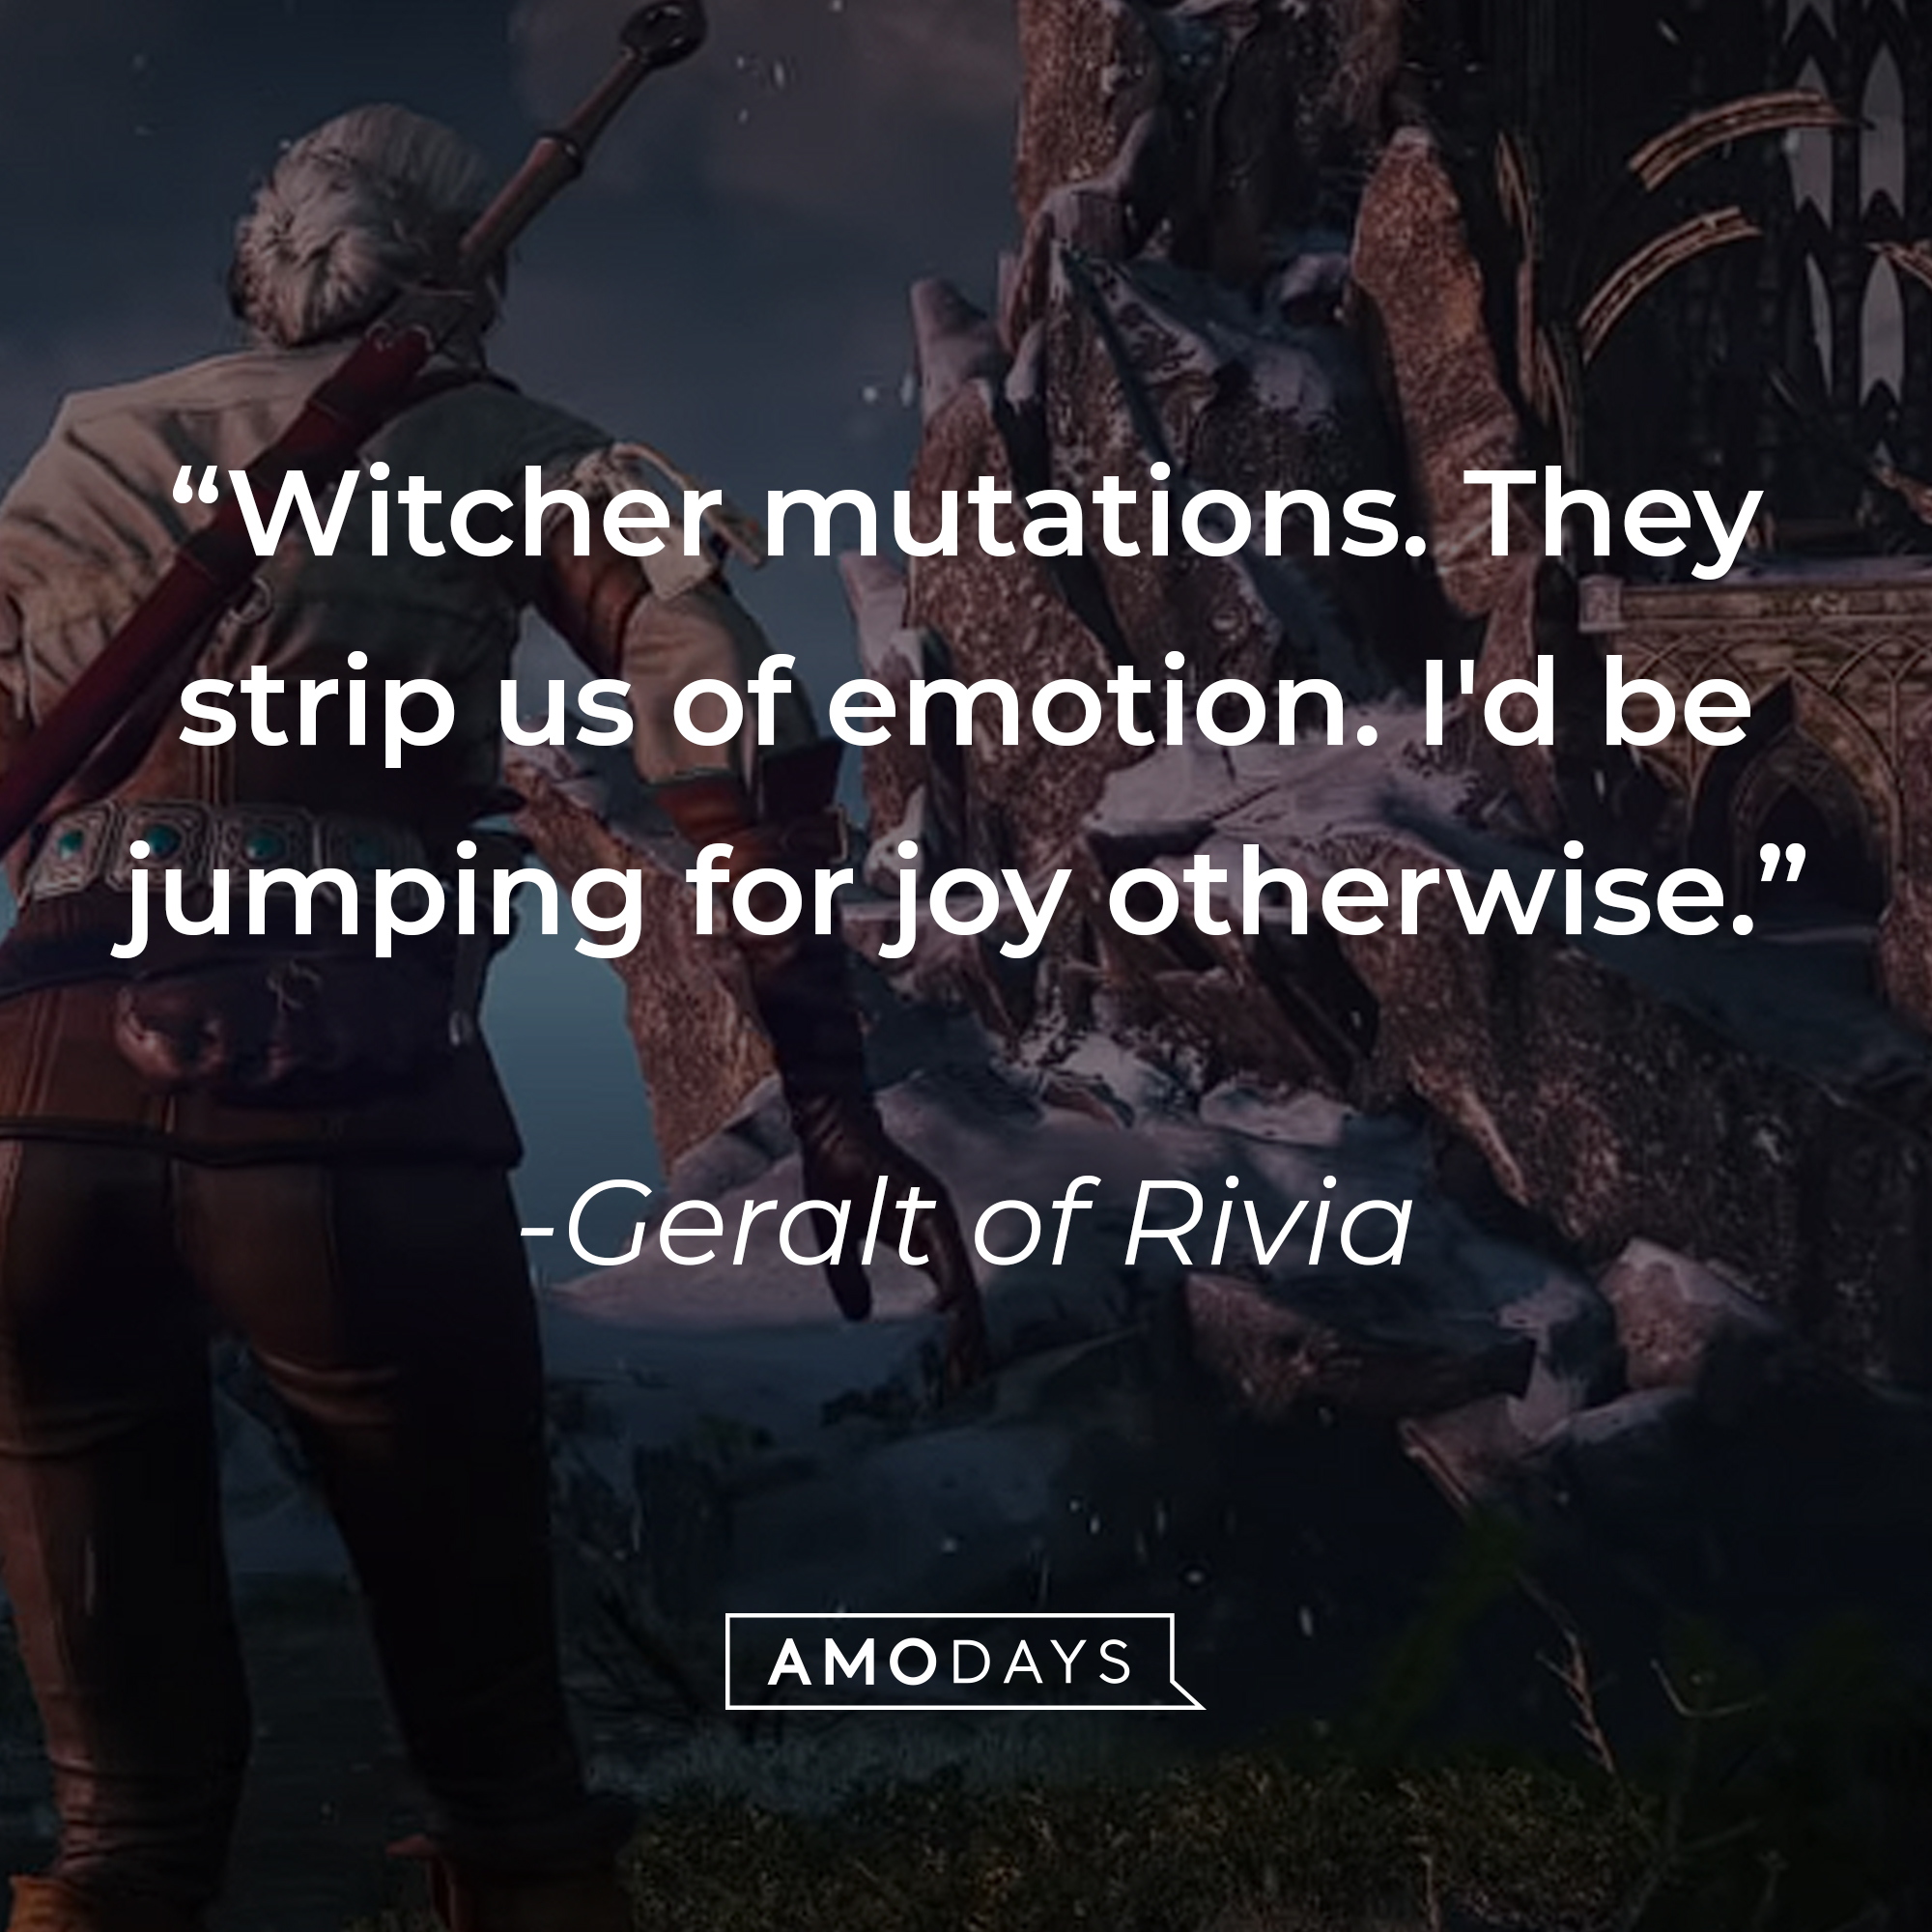 Geralt of Rivia's quote: “Witcher mutations. They strip us of emotion. I'd be jumping for joy otherwise." | Source: youtube.com/CDPRED